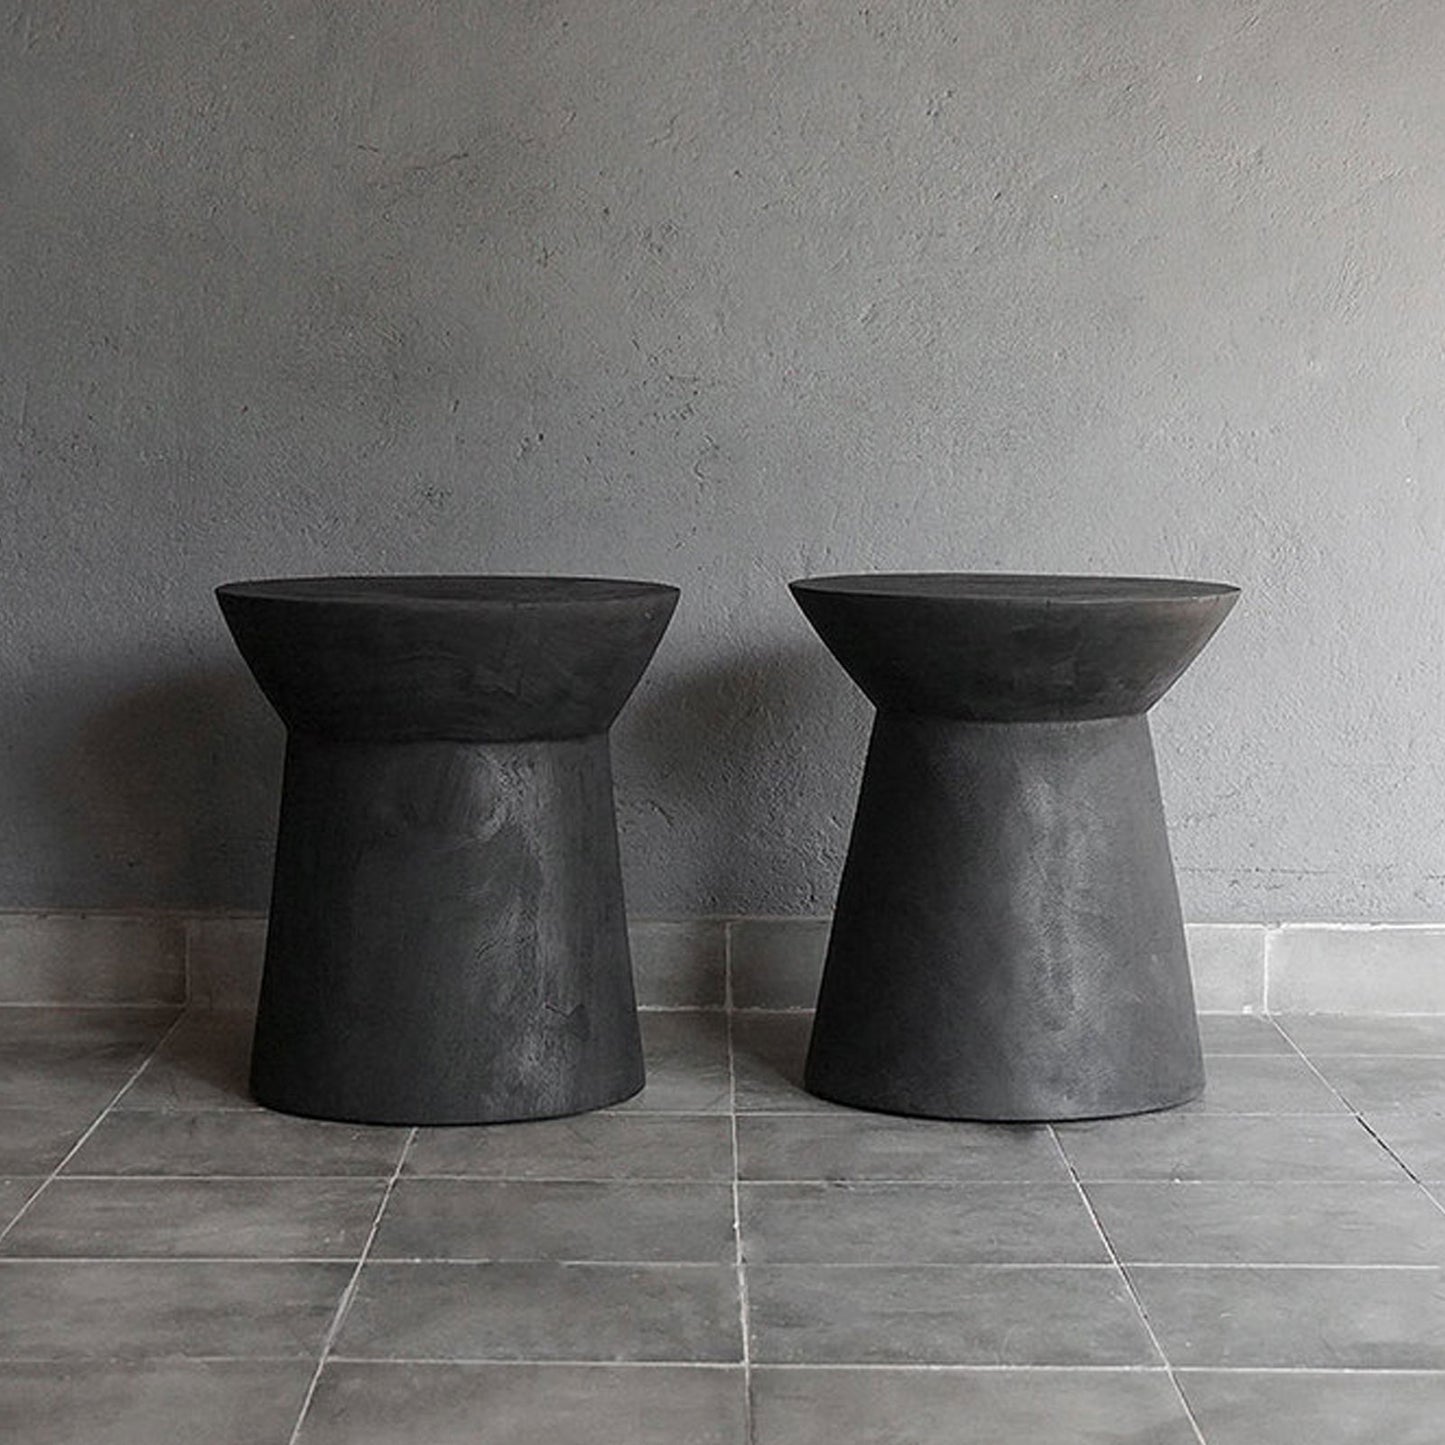 Mushroom Stool in Charcoal (Pick Up / Local Delivery Only)